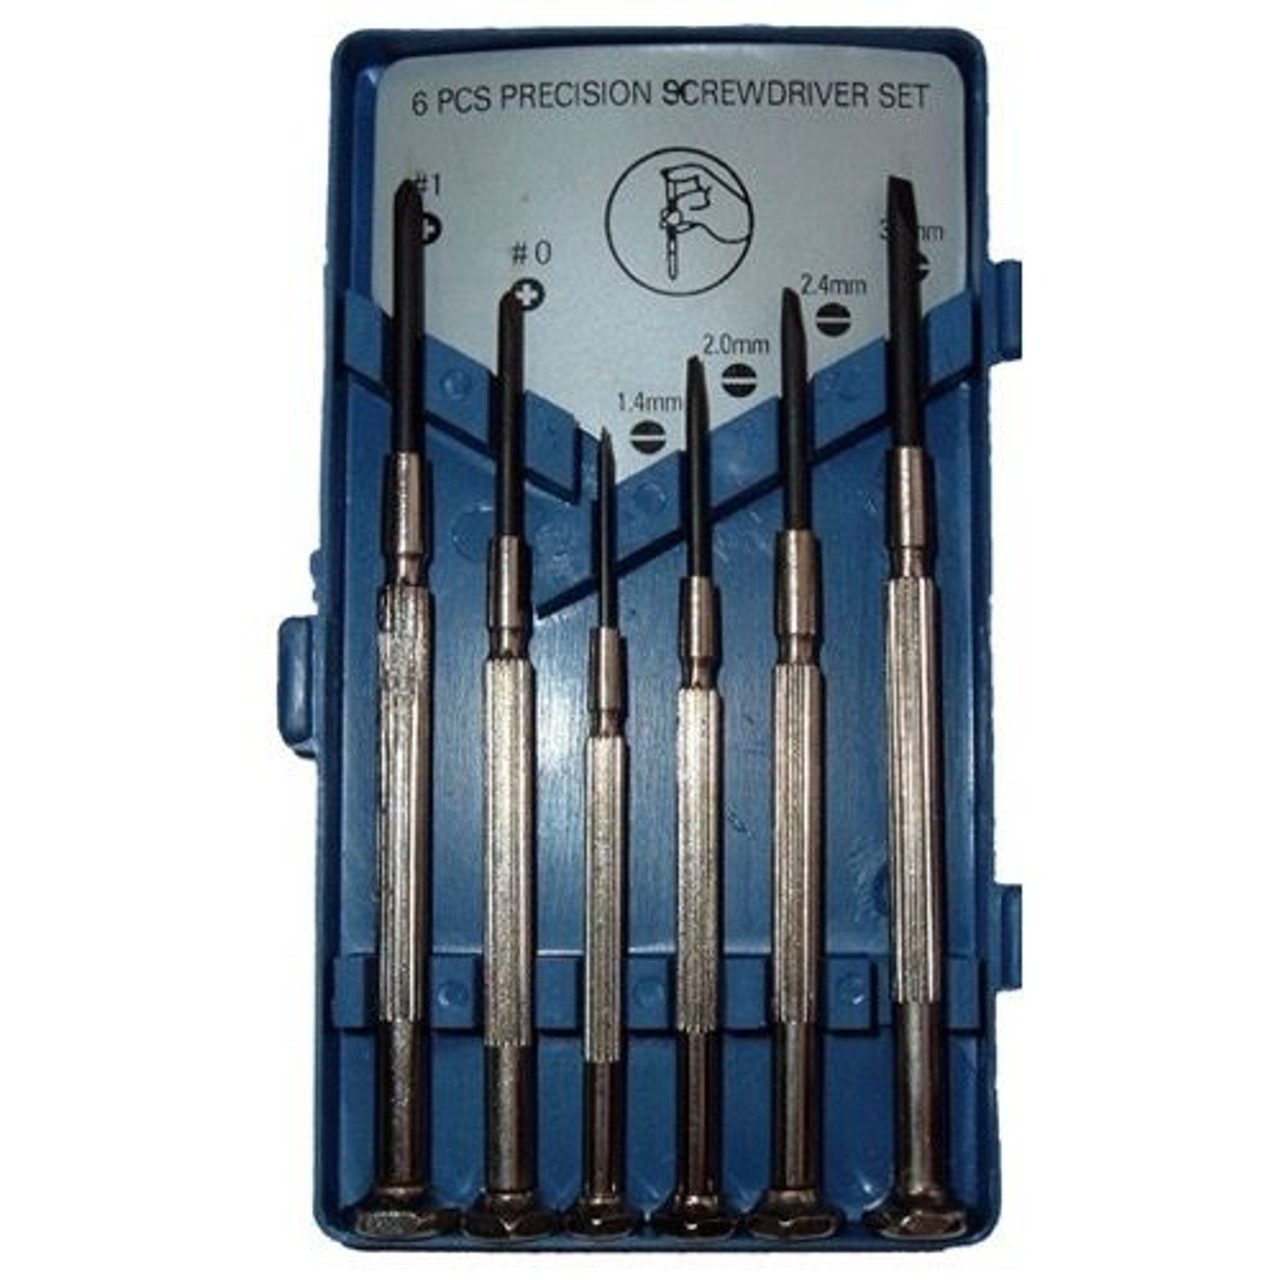 Steren 993-110 Jewelers Screw Driver Set 6 Piece Set Eye Glass Repair SE Precision with Swivel Top, Electronic Equipment and Eye Glasses Adjustment Tools, Part # 993110